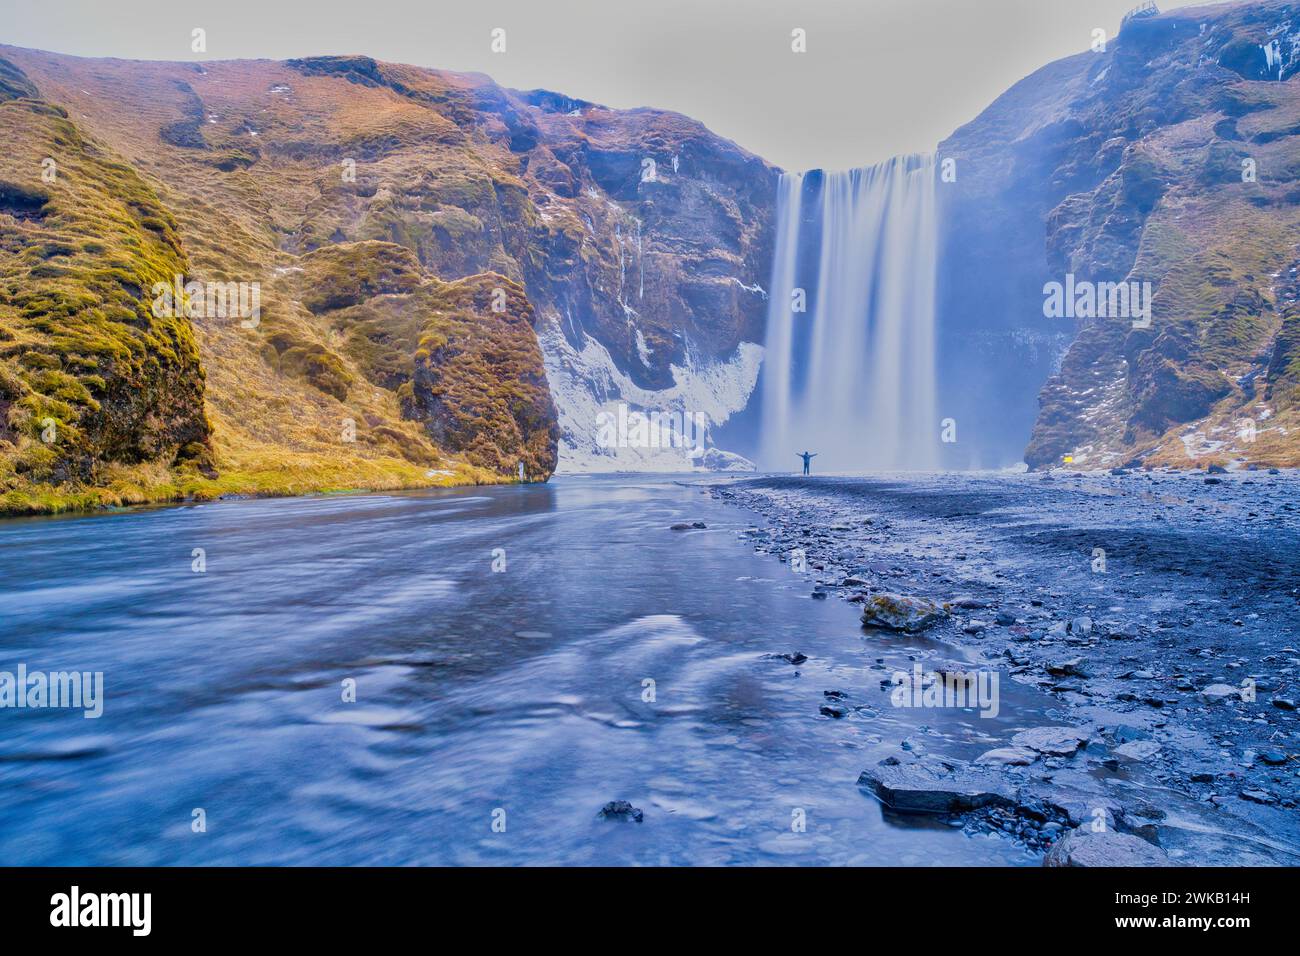 Skogafoss waterfall Iceland in winter with loan person standing in front of waterfall Stock Photo